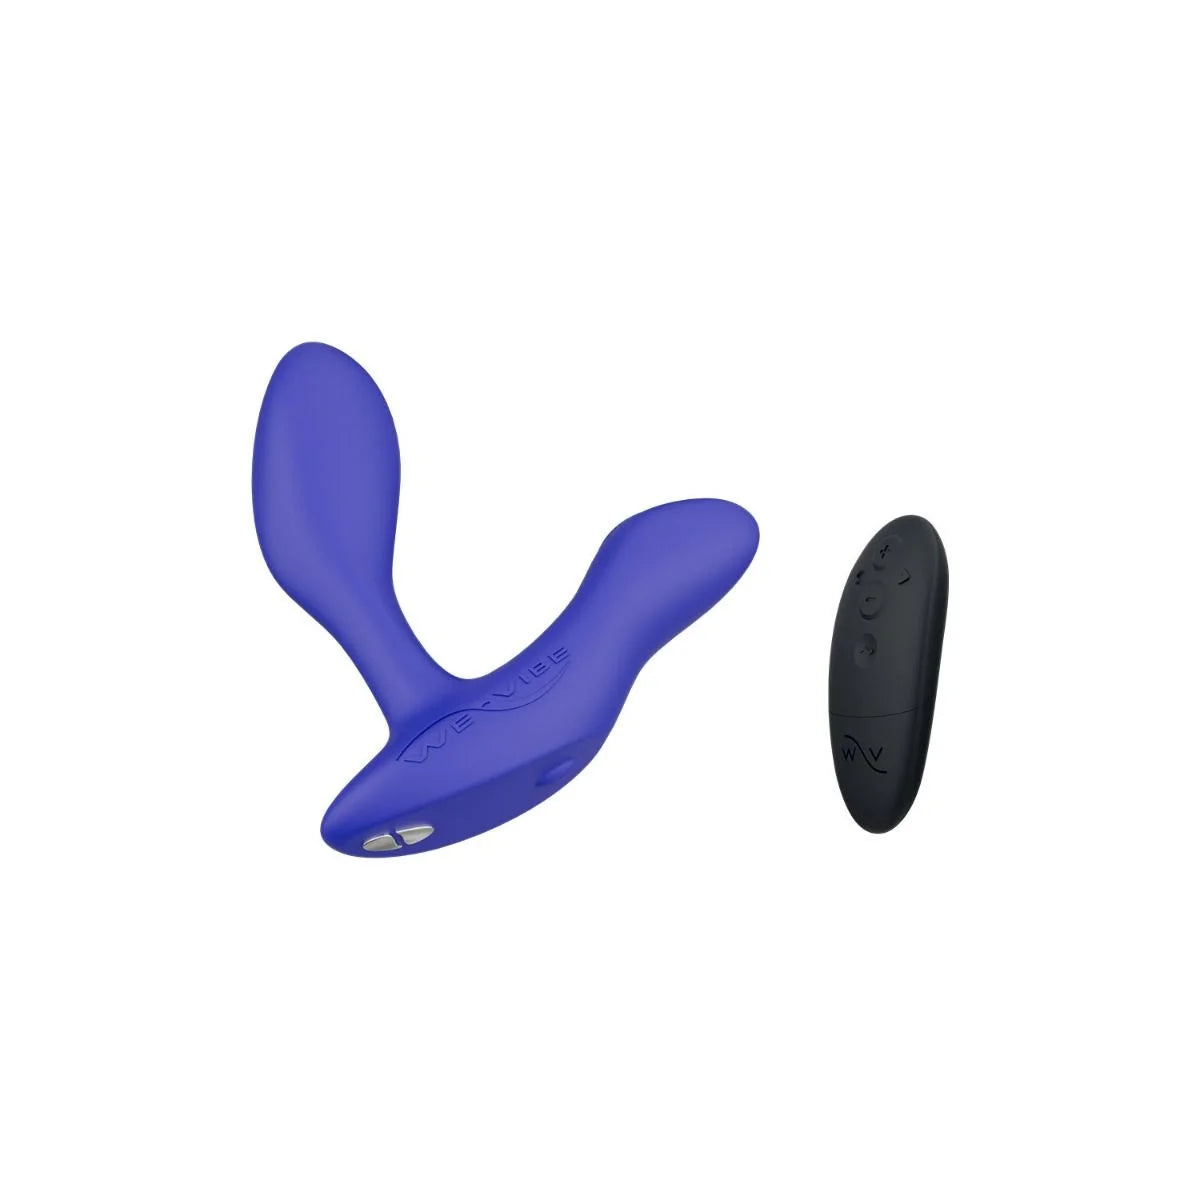 We-Vibe Vector+ Remote-Controlled Vibrating Prostate Massager